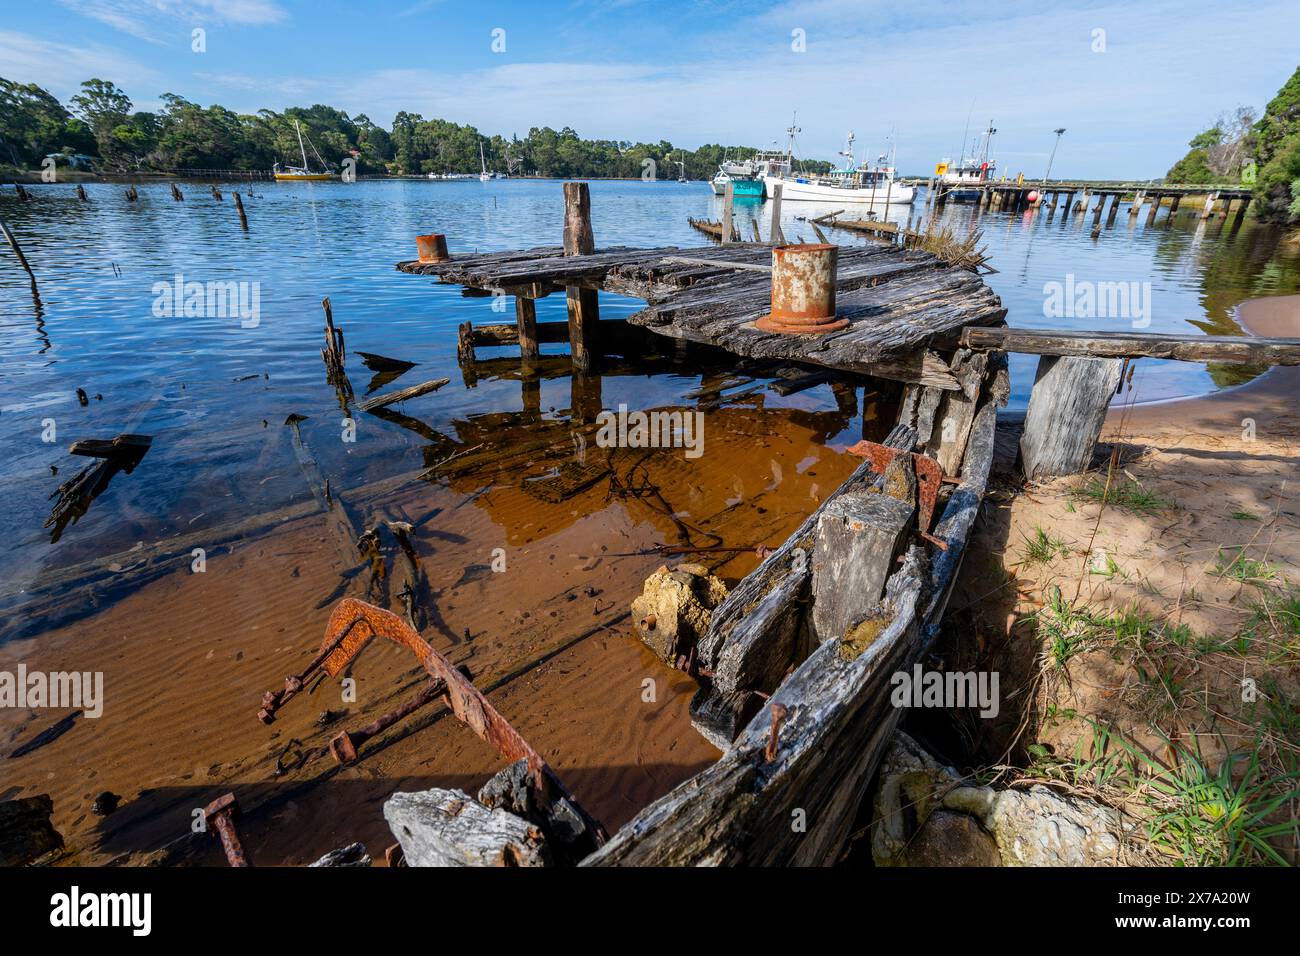 Remains of wooden timber barges abandoned and rotting in Risby Cove, Strahan, West Coast Tasmania Stock Photo